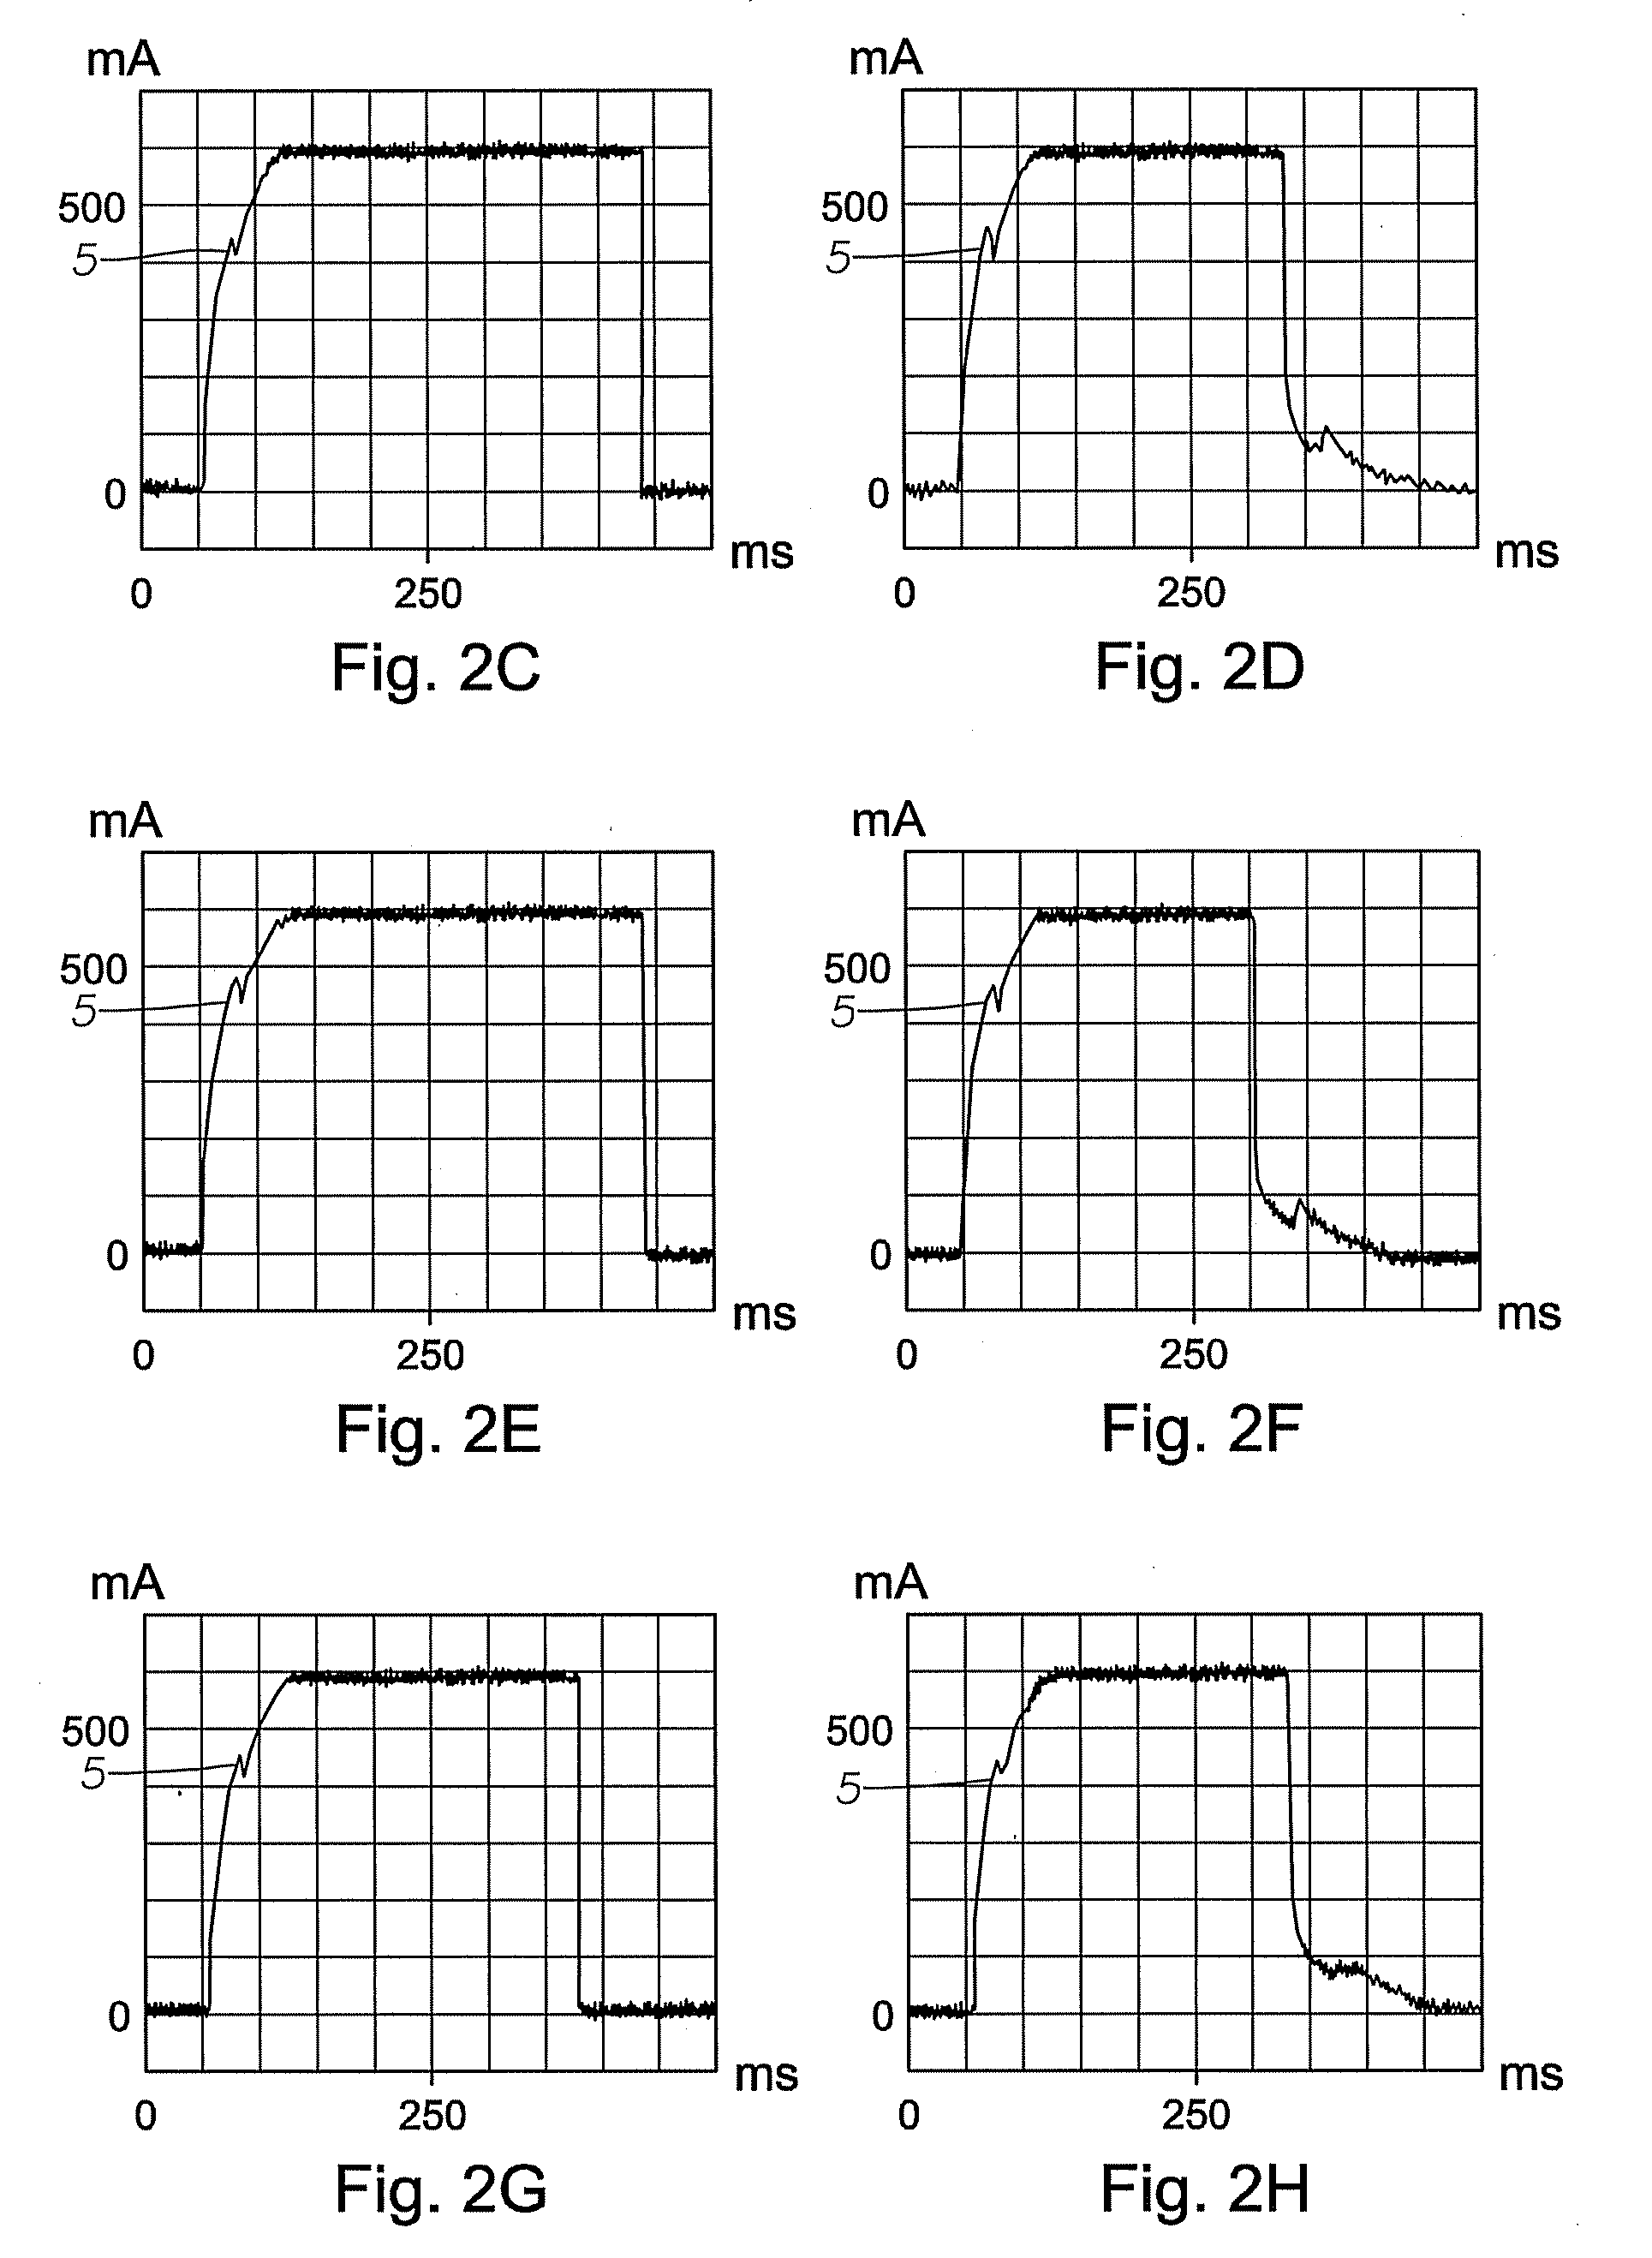 Monitoring A Solenoid of A Directional Control Valve